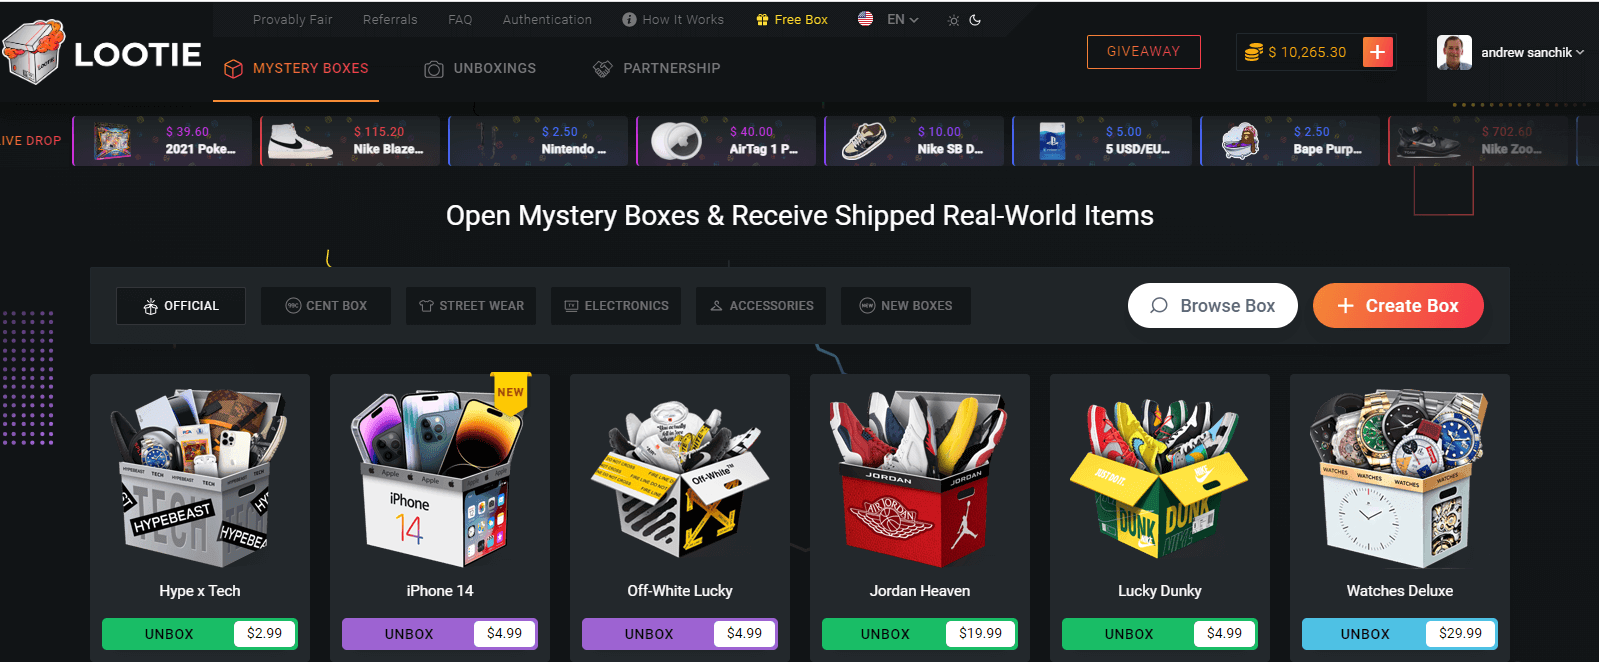 Open Mystery Boxes at Lootie, Unbox Authentic Products